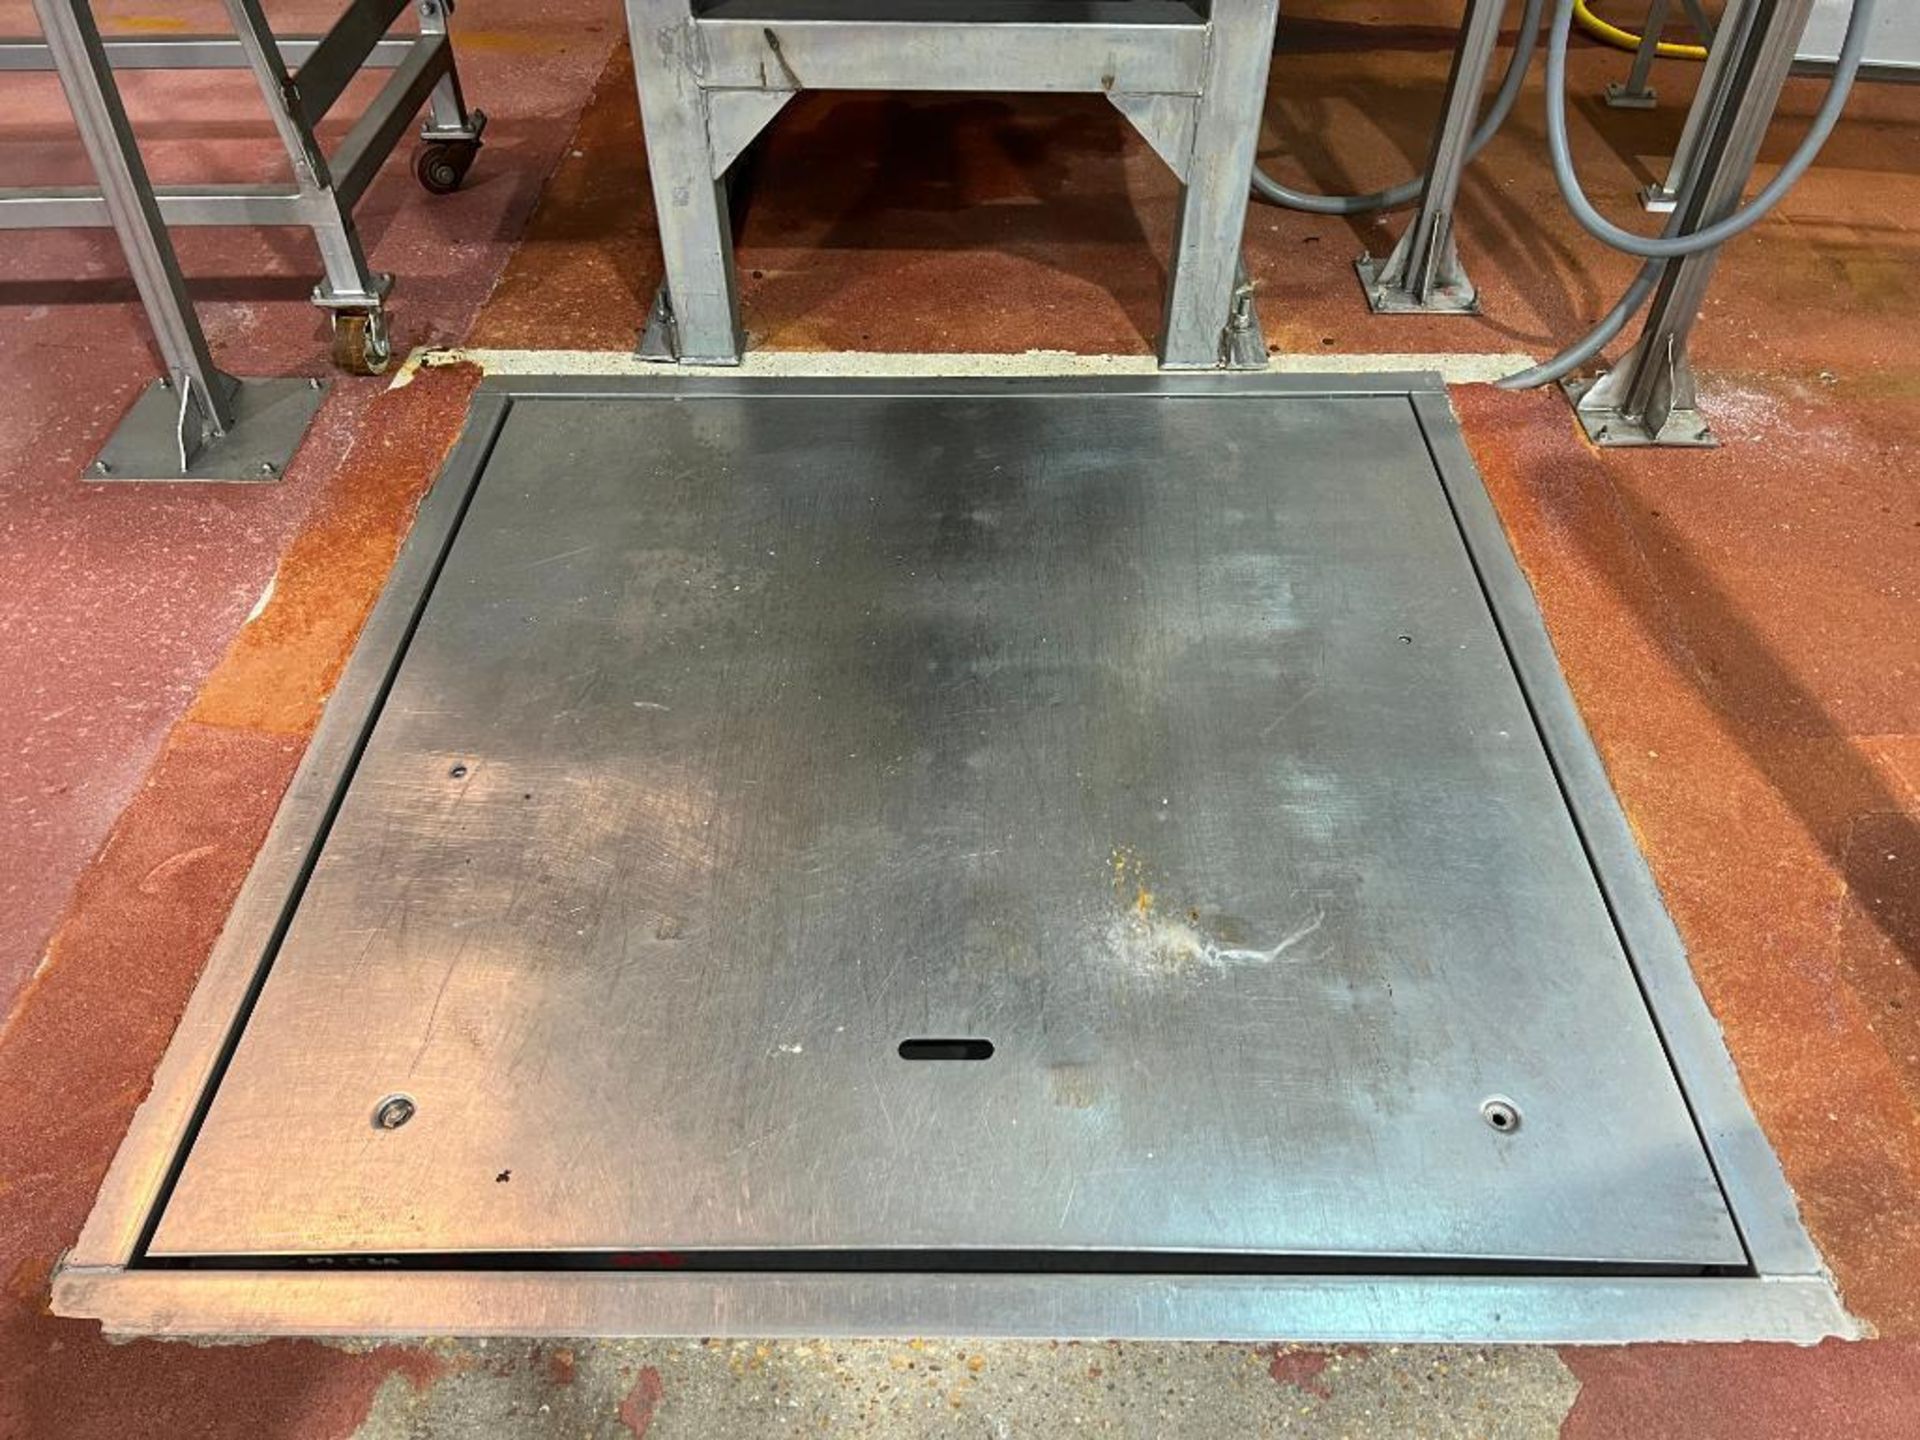 Rice Lake CW-90 Scale with 5' x 5' In-Floor Scale Platform - Rigging Fee: $1100